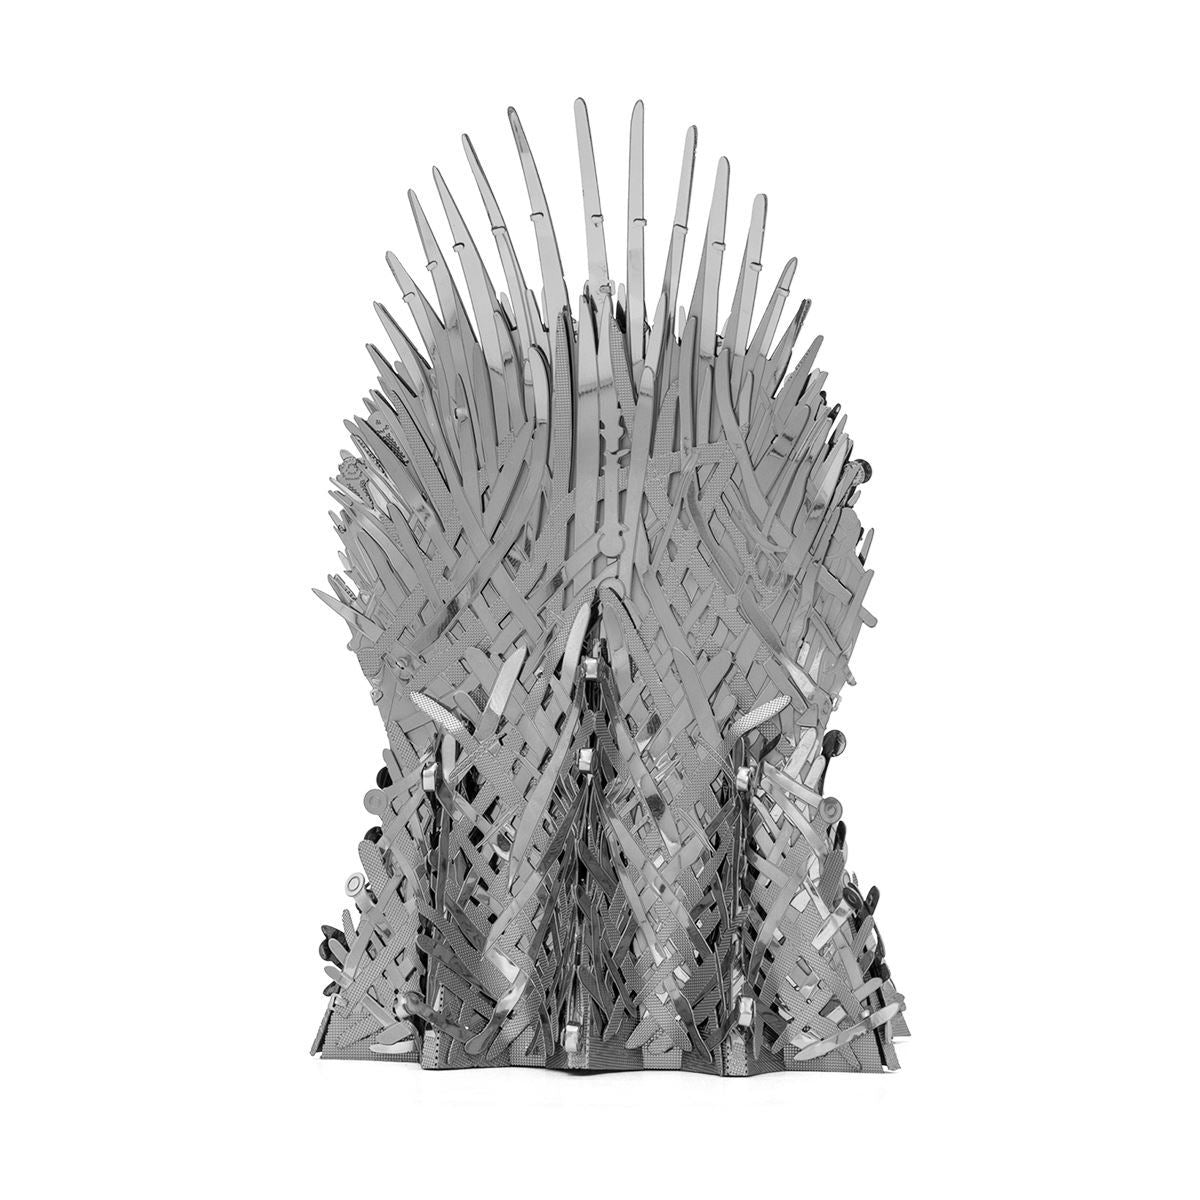 The Iron Throne | Know Your Meme